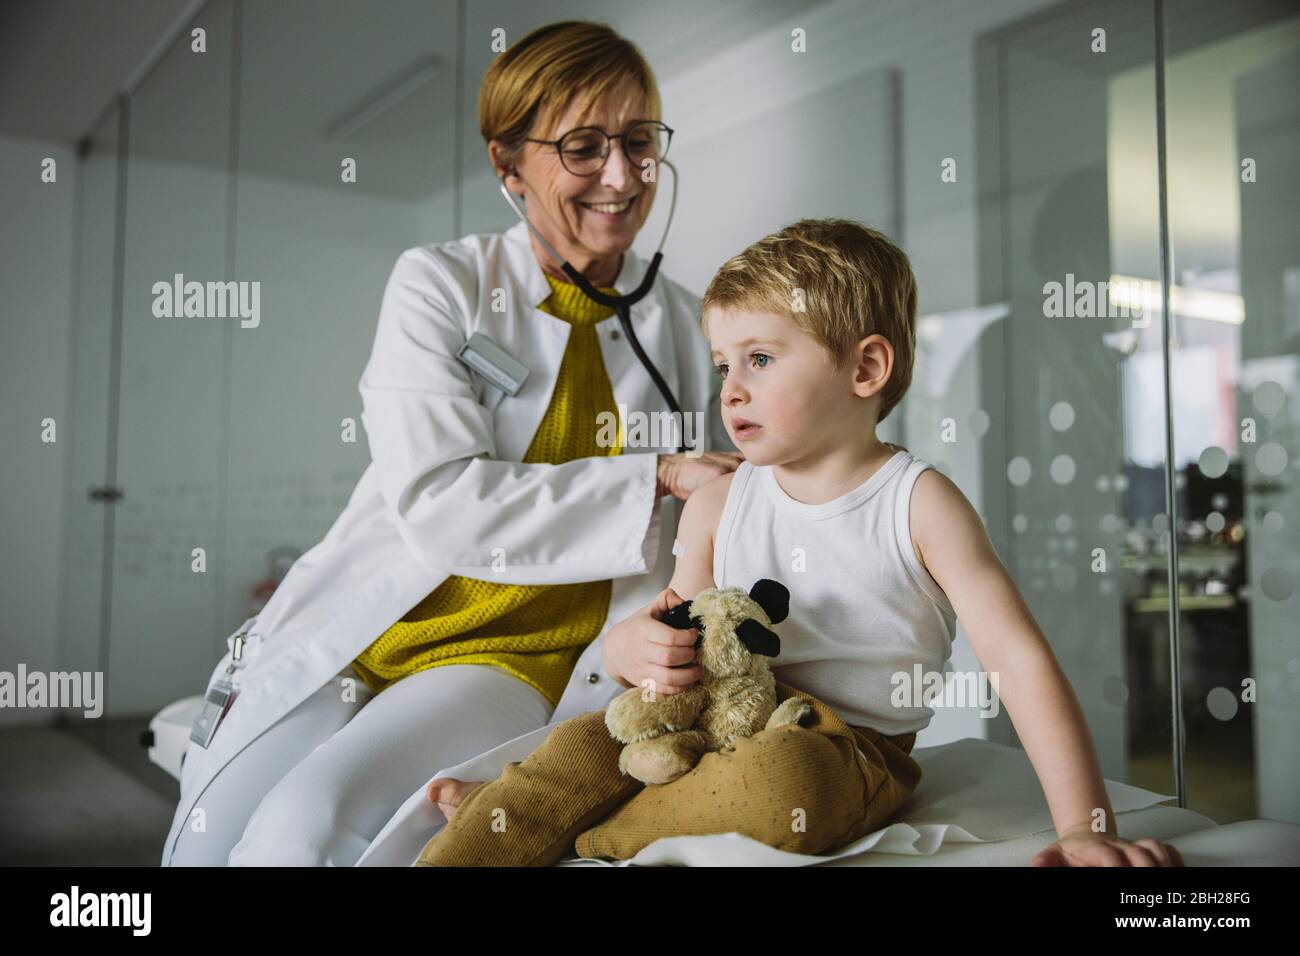 Doctor examining toddler boy with a stethoscope Stock Photo